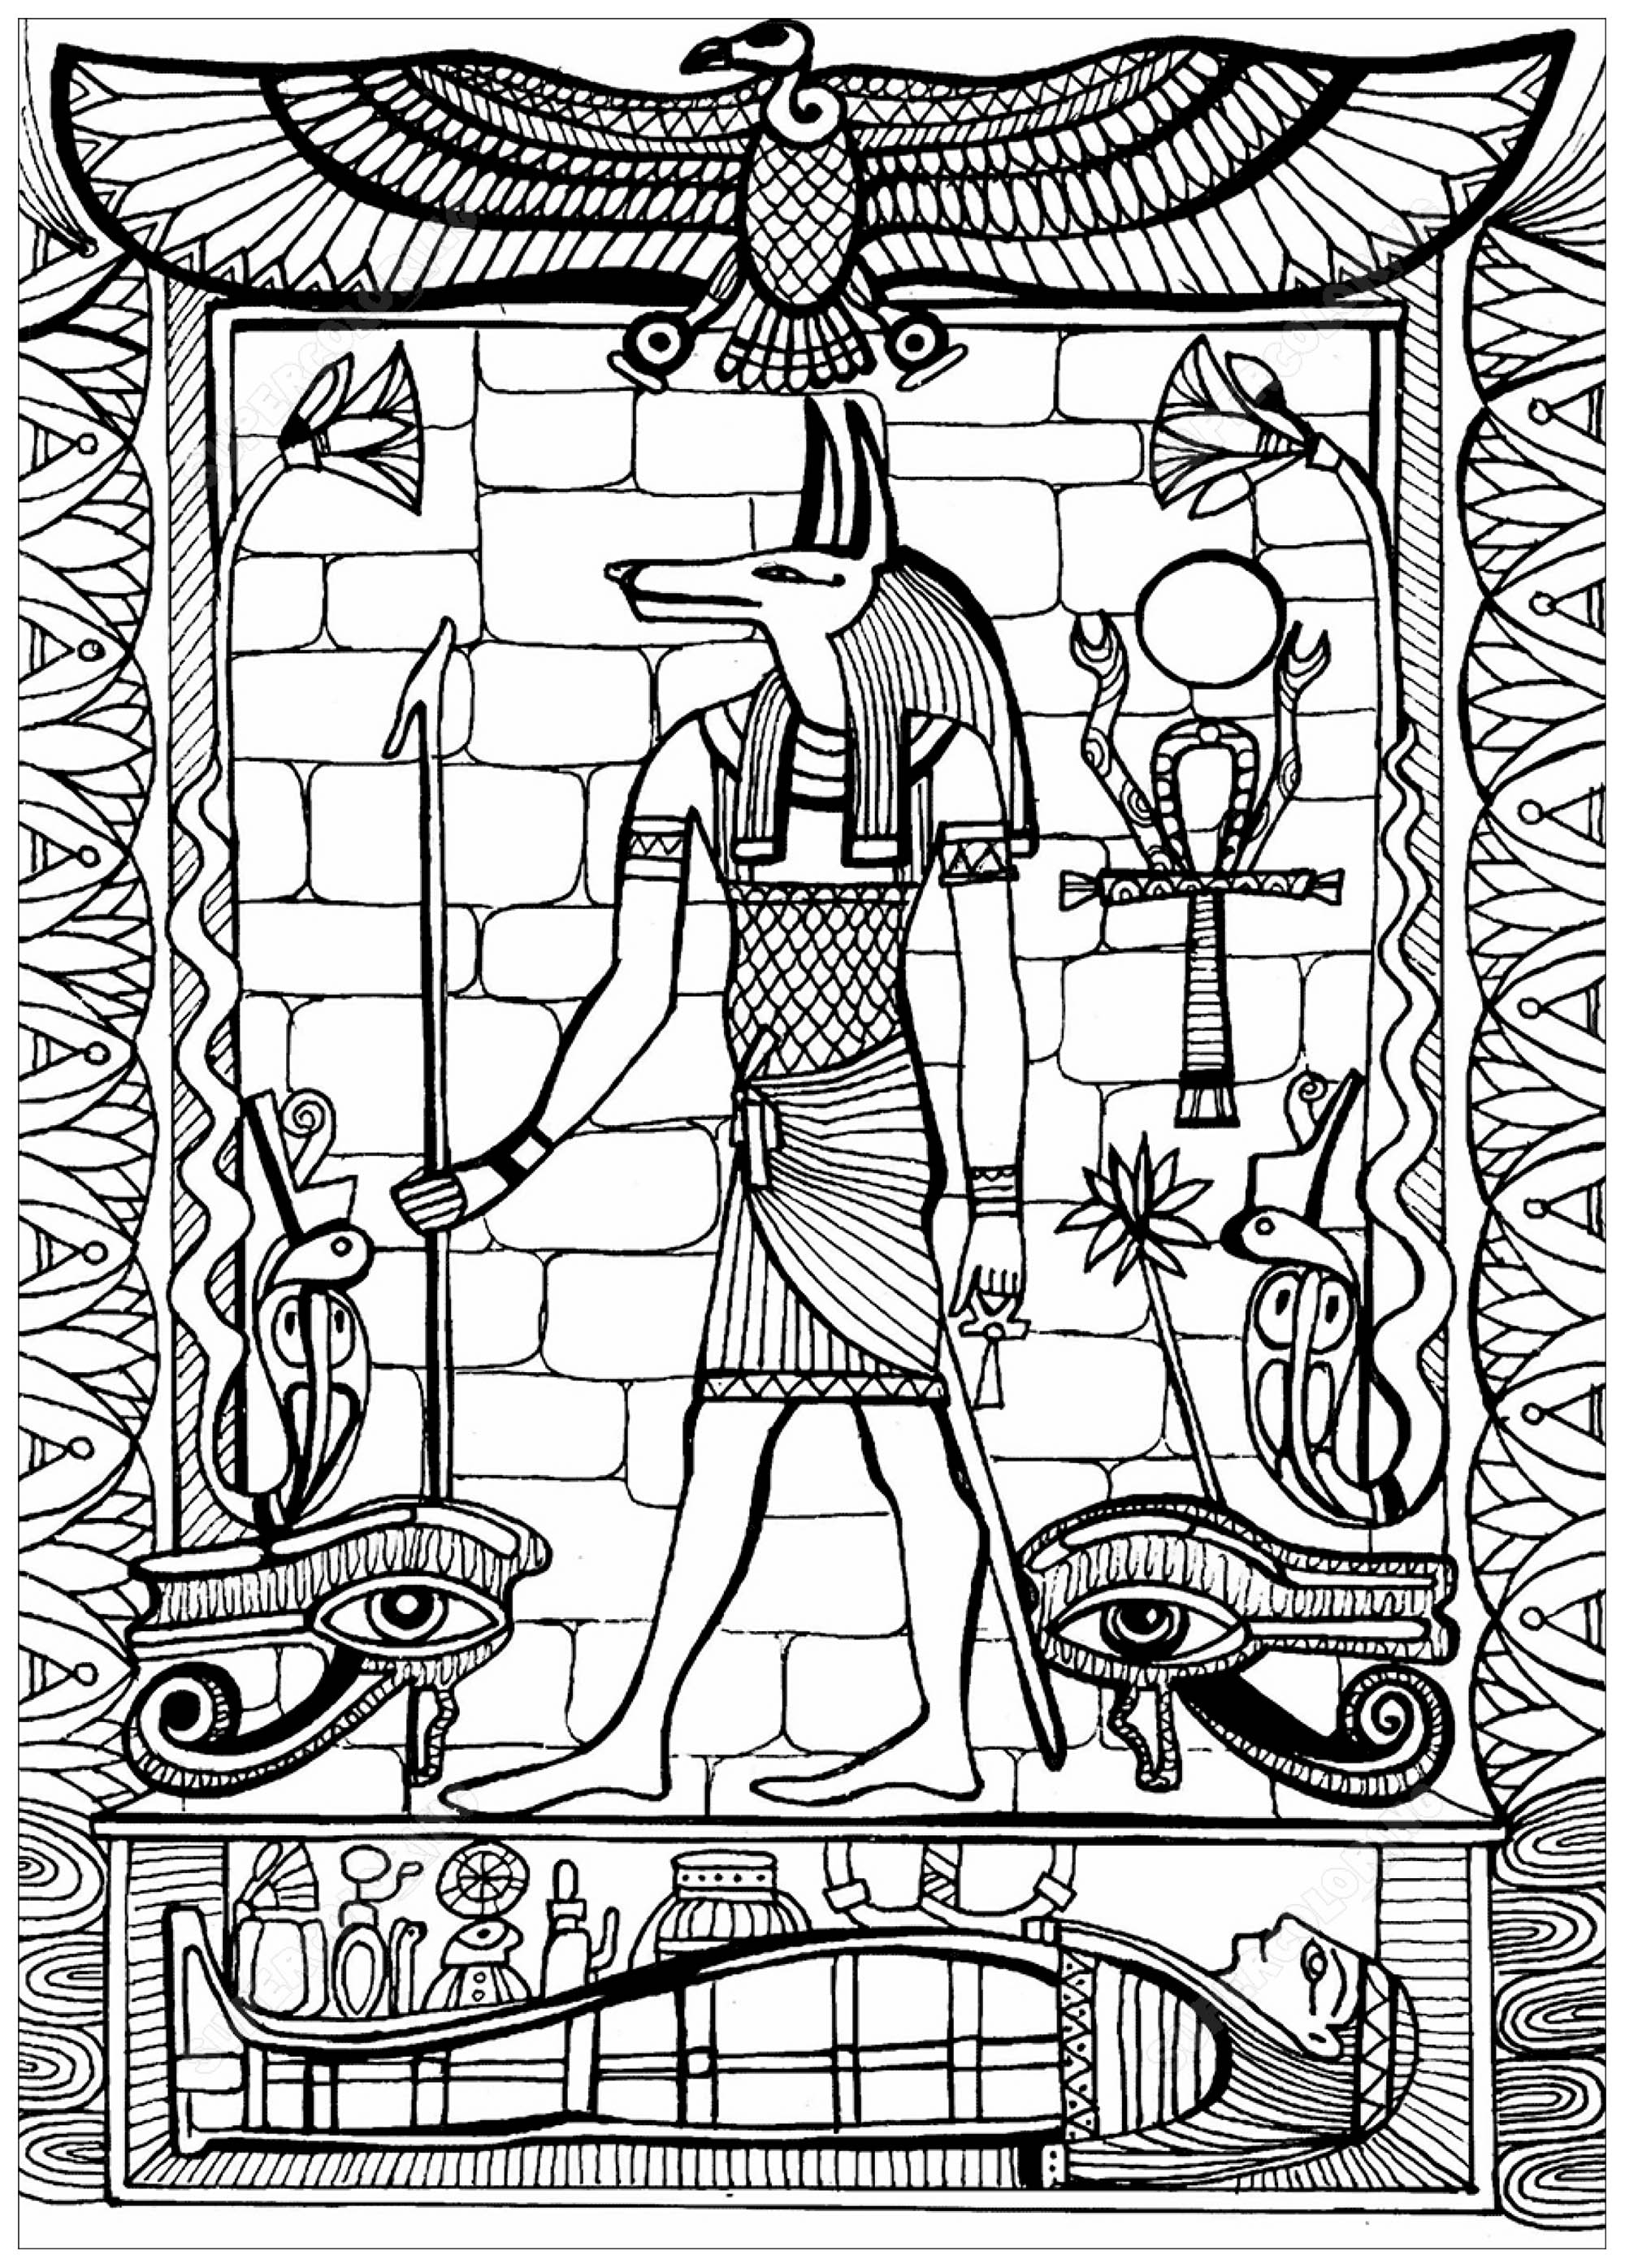 Anubis, God associated with the afterlife in ancient Egyptian religion, usually depicted as a canine